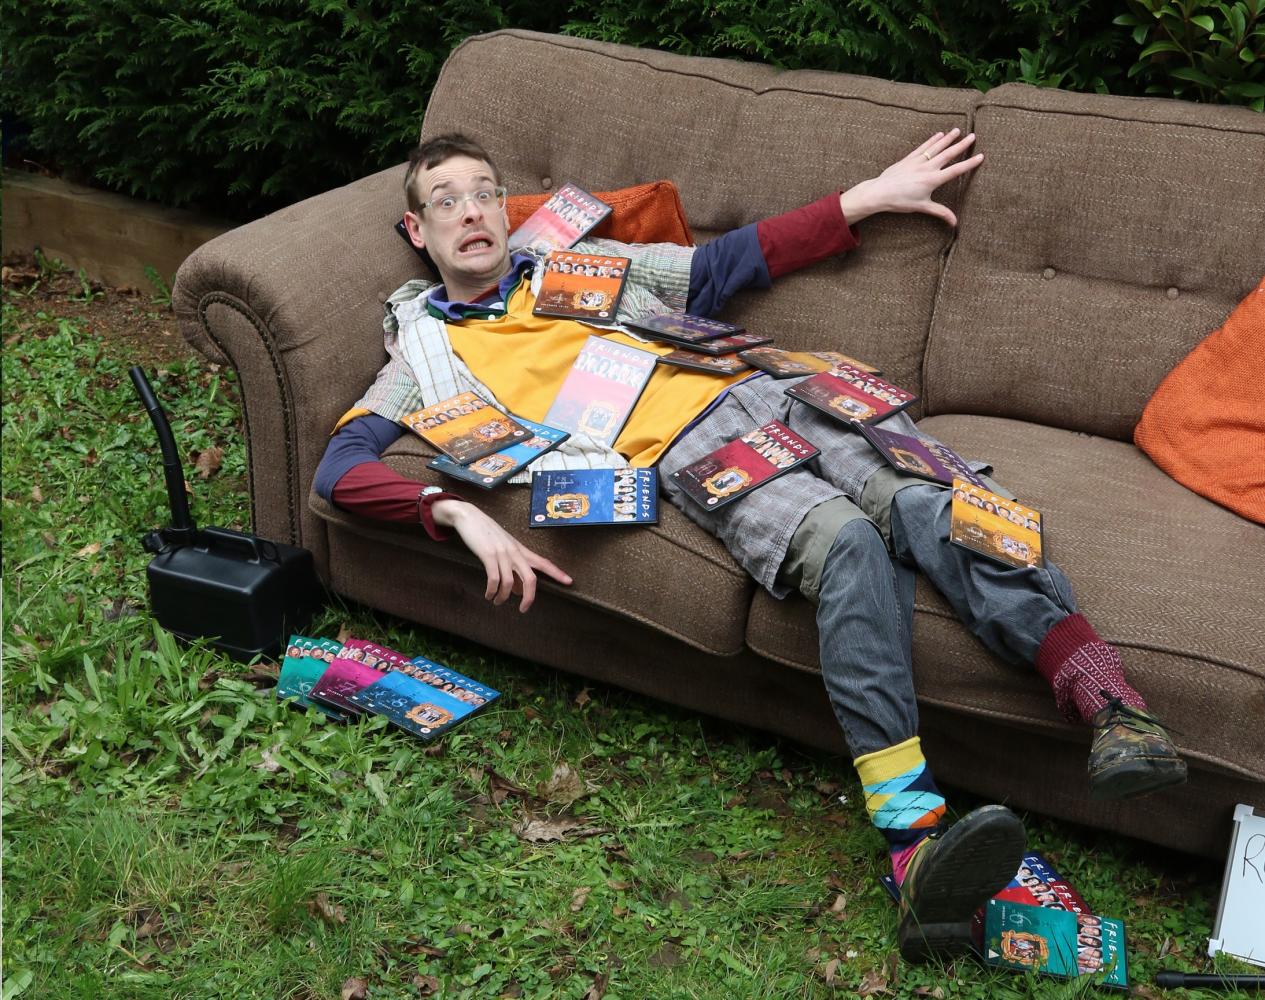 Dylan Dodds lies on a sofa, he's covered in Friends DVD's and looks like he's been caught doing something he shouldn't be